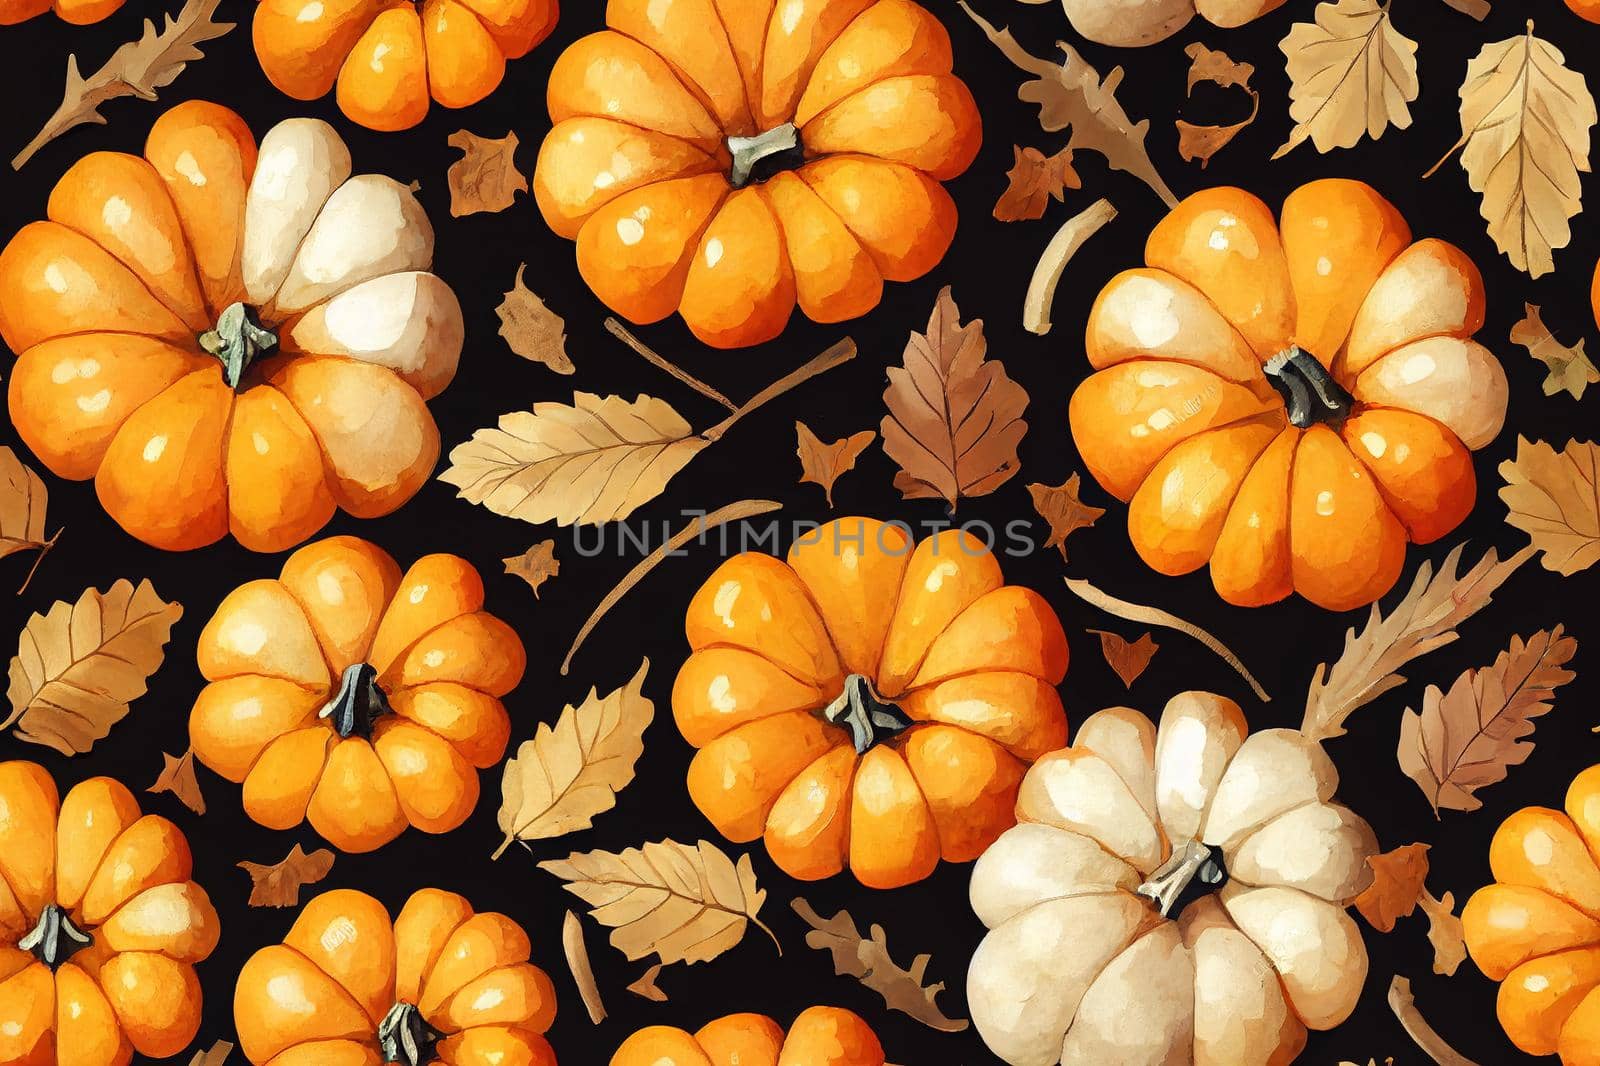 Seamless pattern with the gifts of autumn, pumpkins, acorns, leaves and dried grasses on a white background. Hand painted in watercolor.